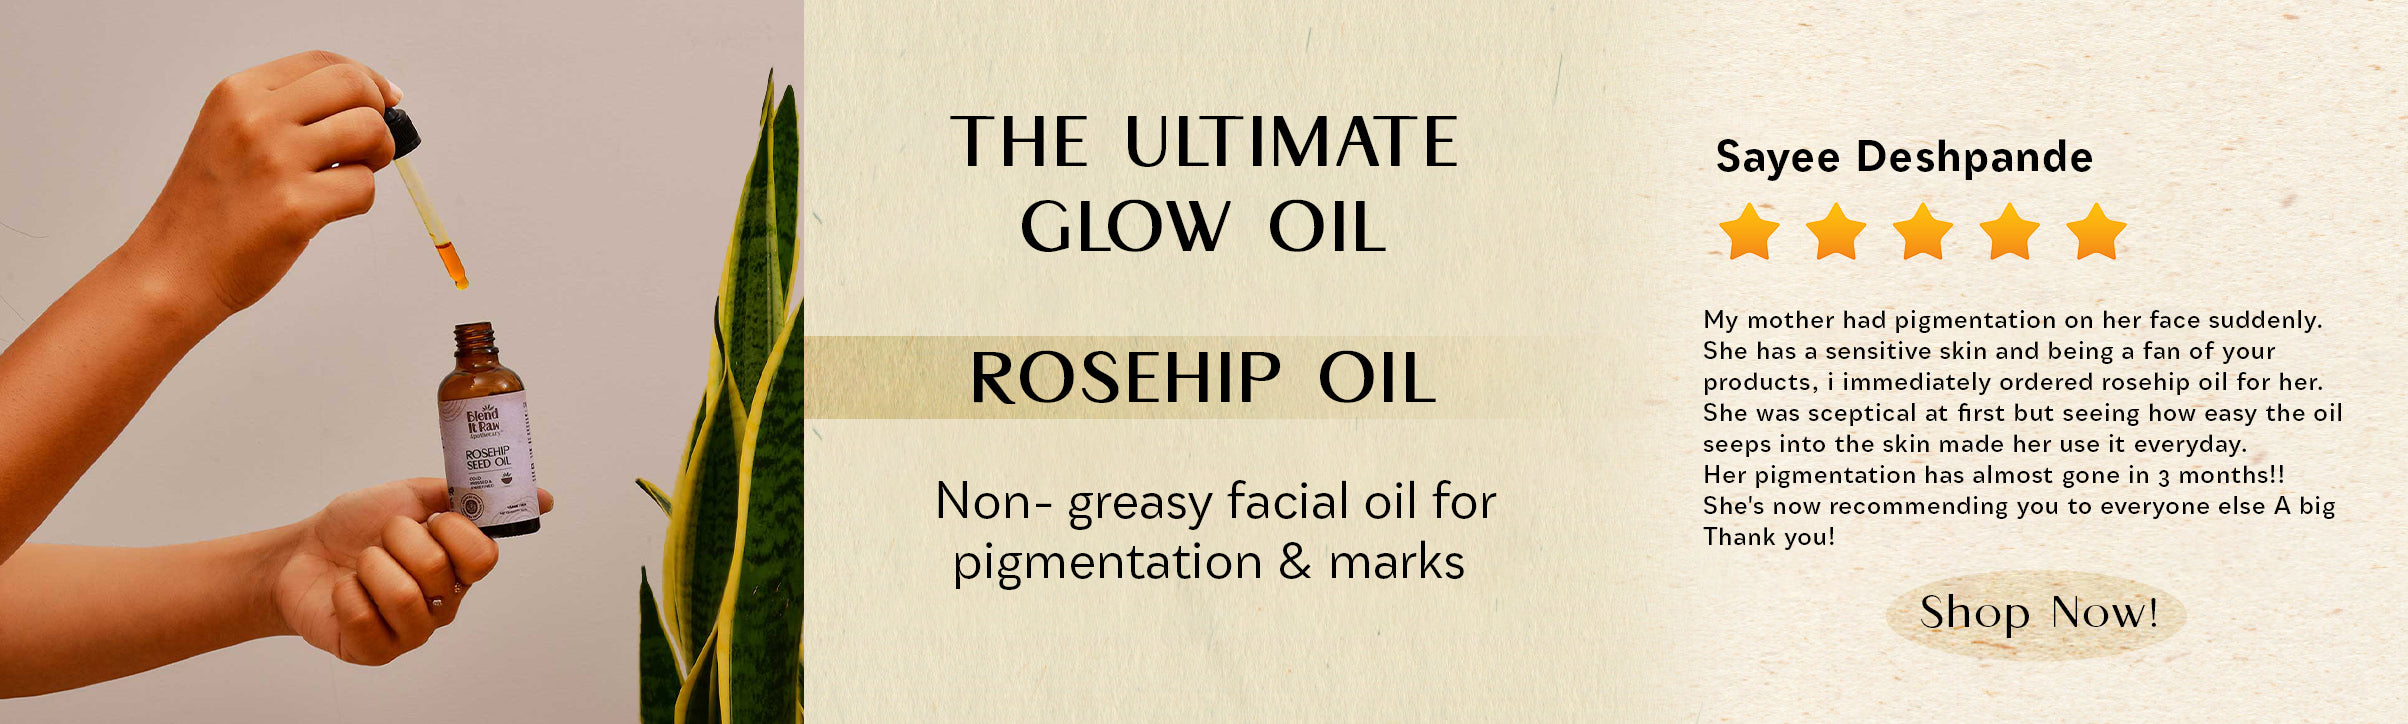 Website banner for rosehip oil from Blend It Raw